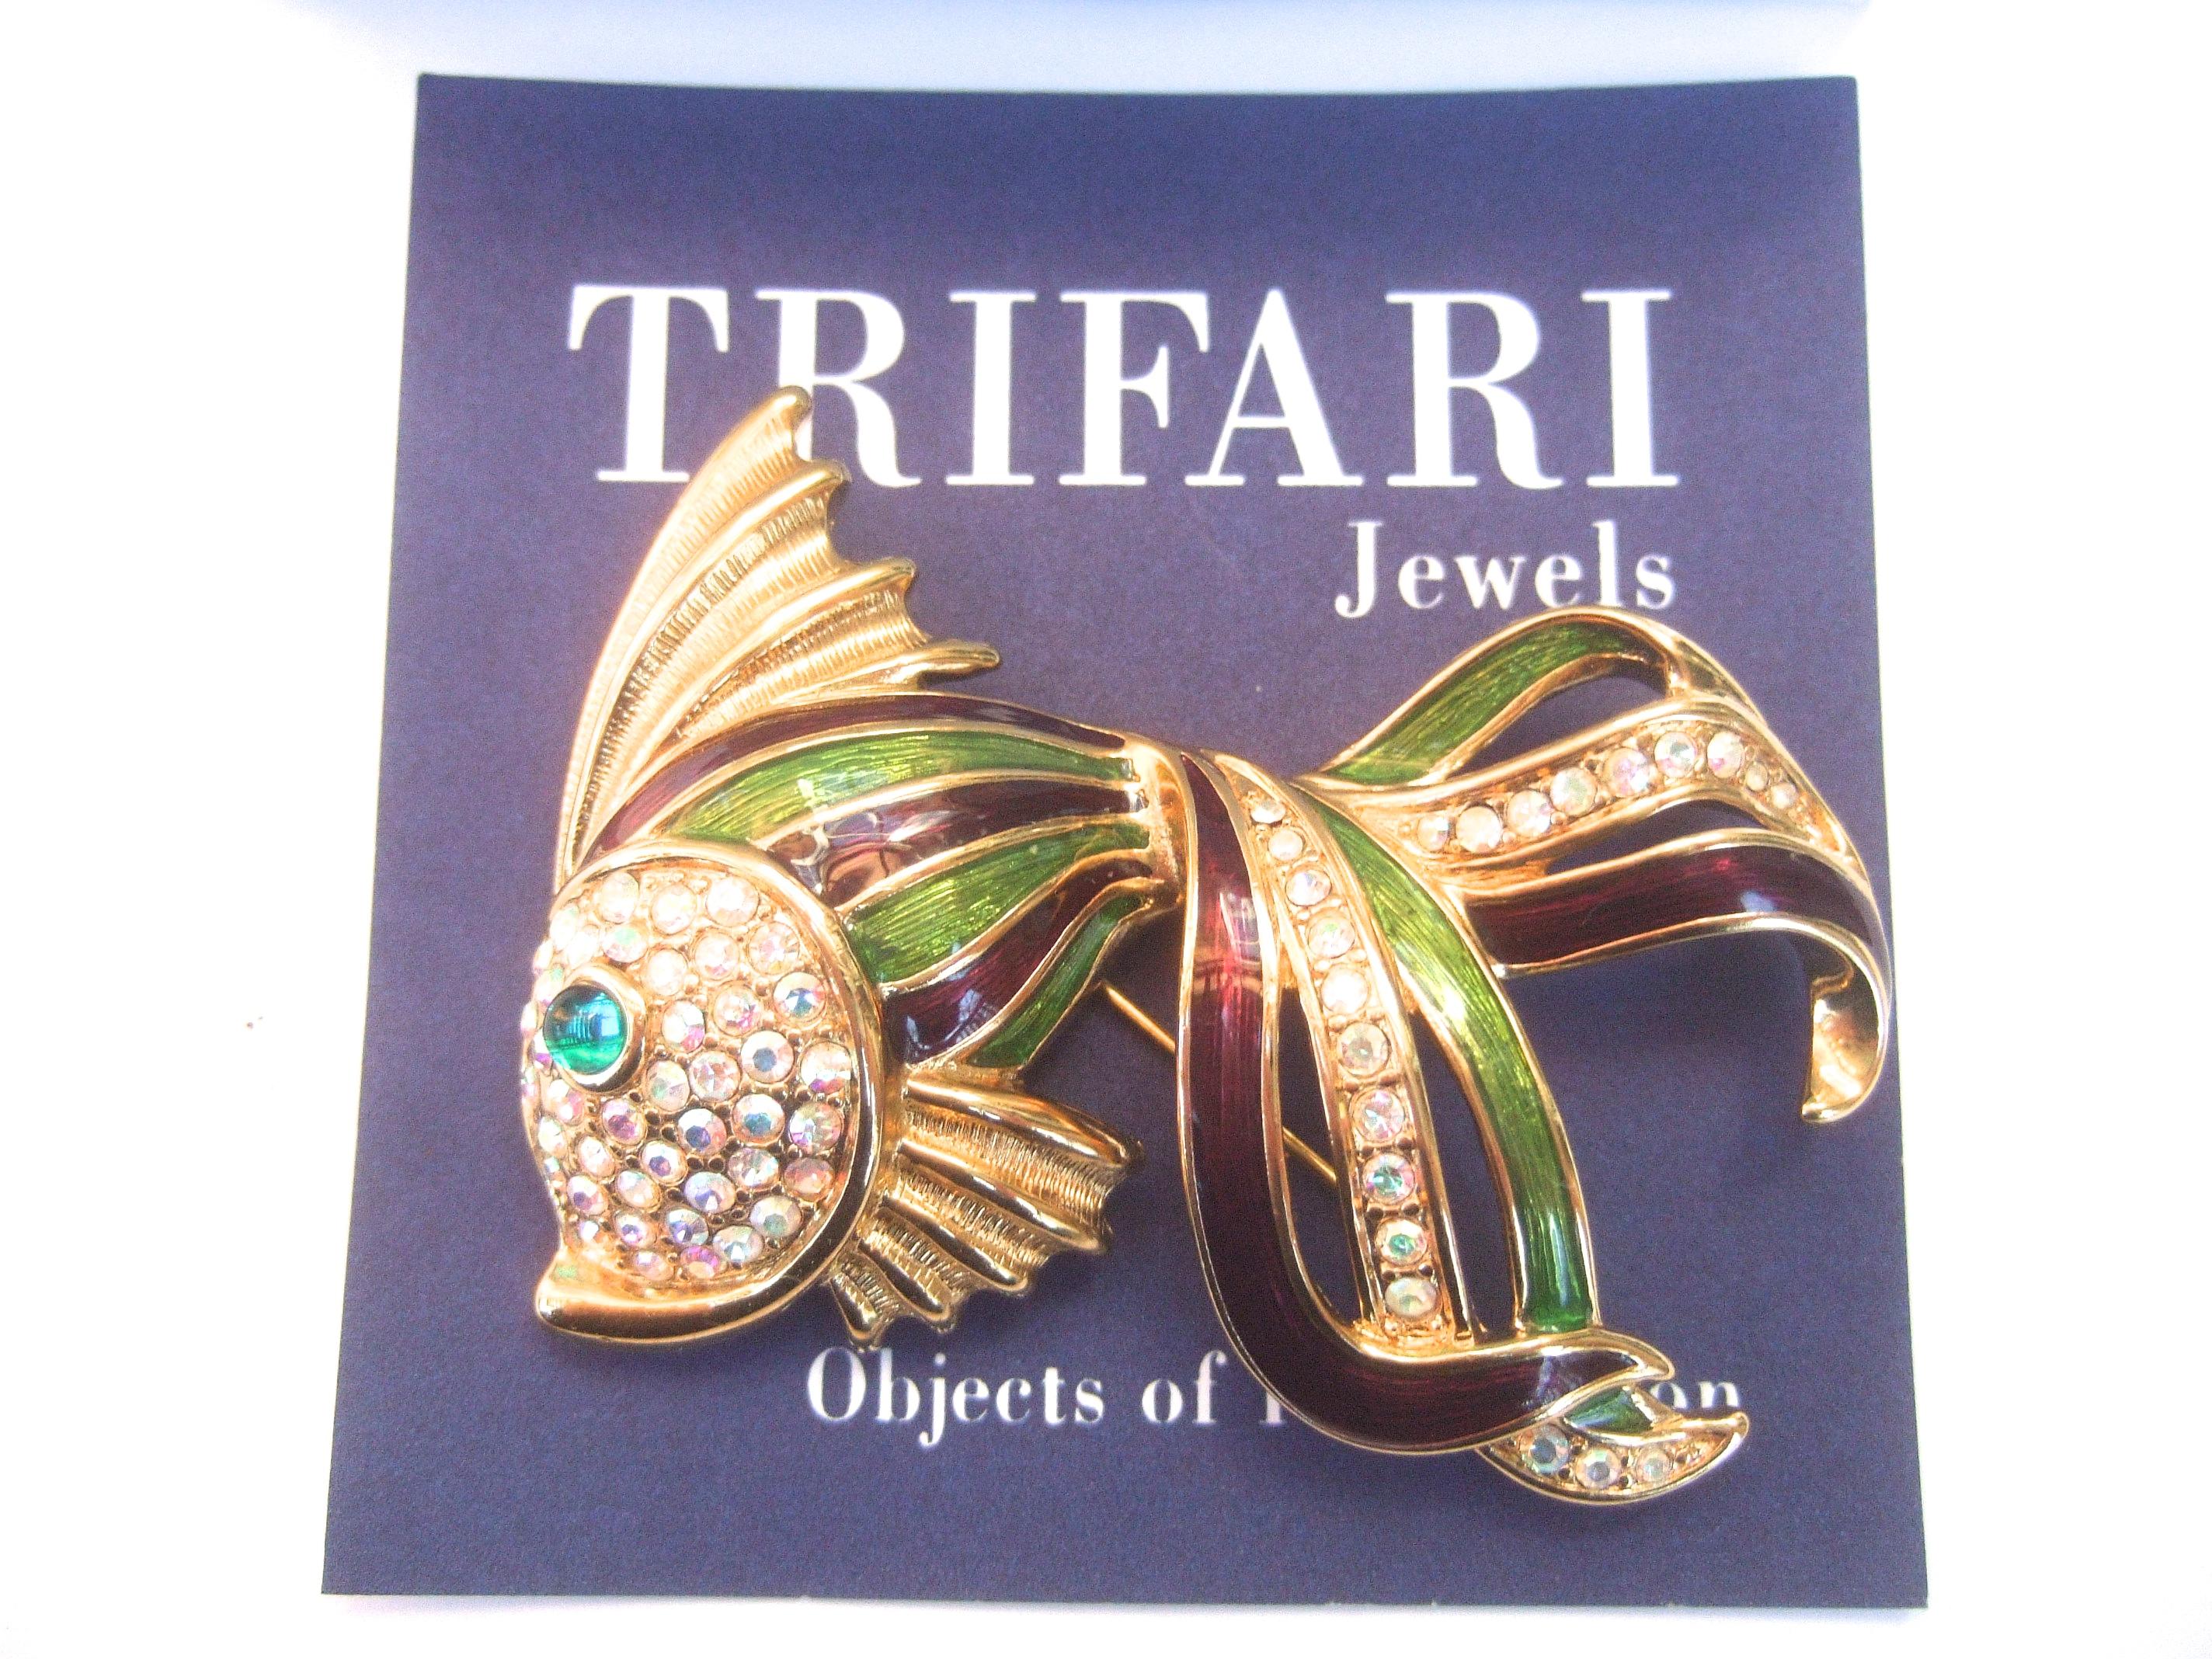 Trifari crystal enamel large scale fish brooch in Trifari box c 1997
The stylized gilt metal fish brooch is encrusted with a cluster
of Aurora Borealis crystals that distinguish the fish's face
The fish's eye is embellished with an emerald green